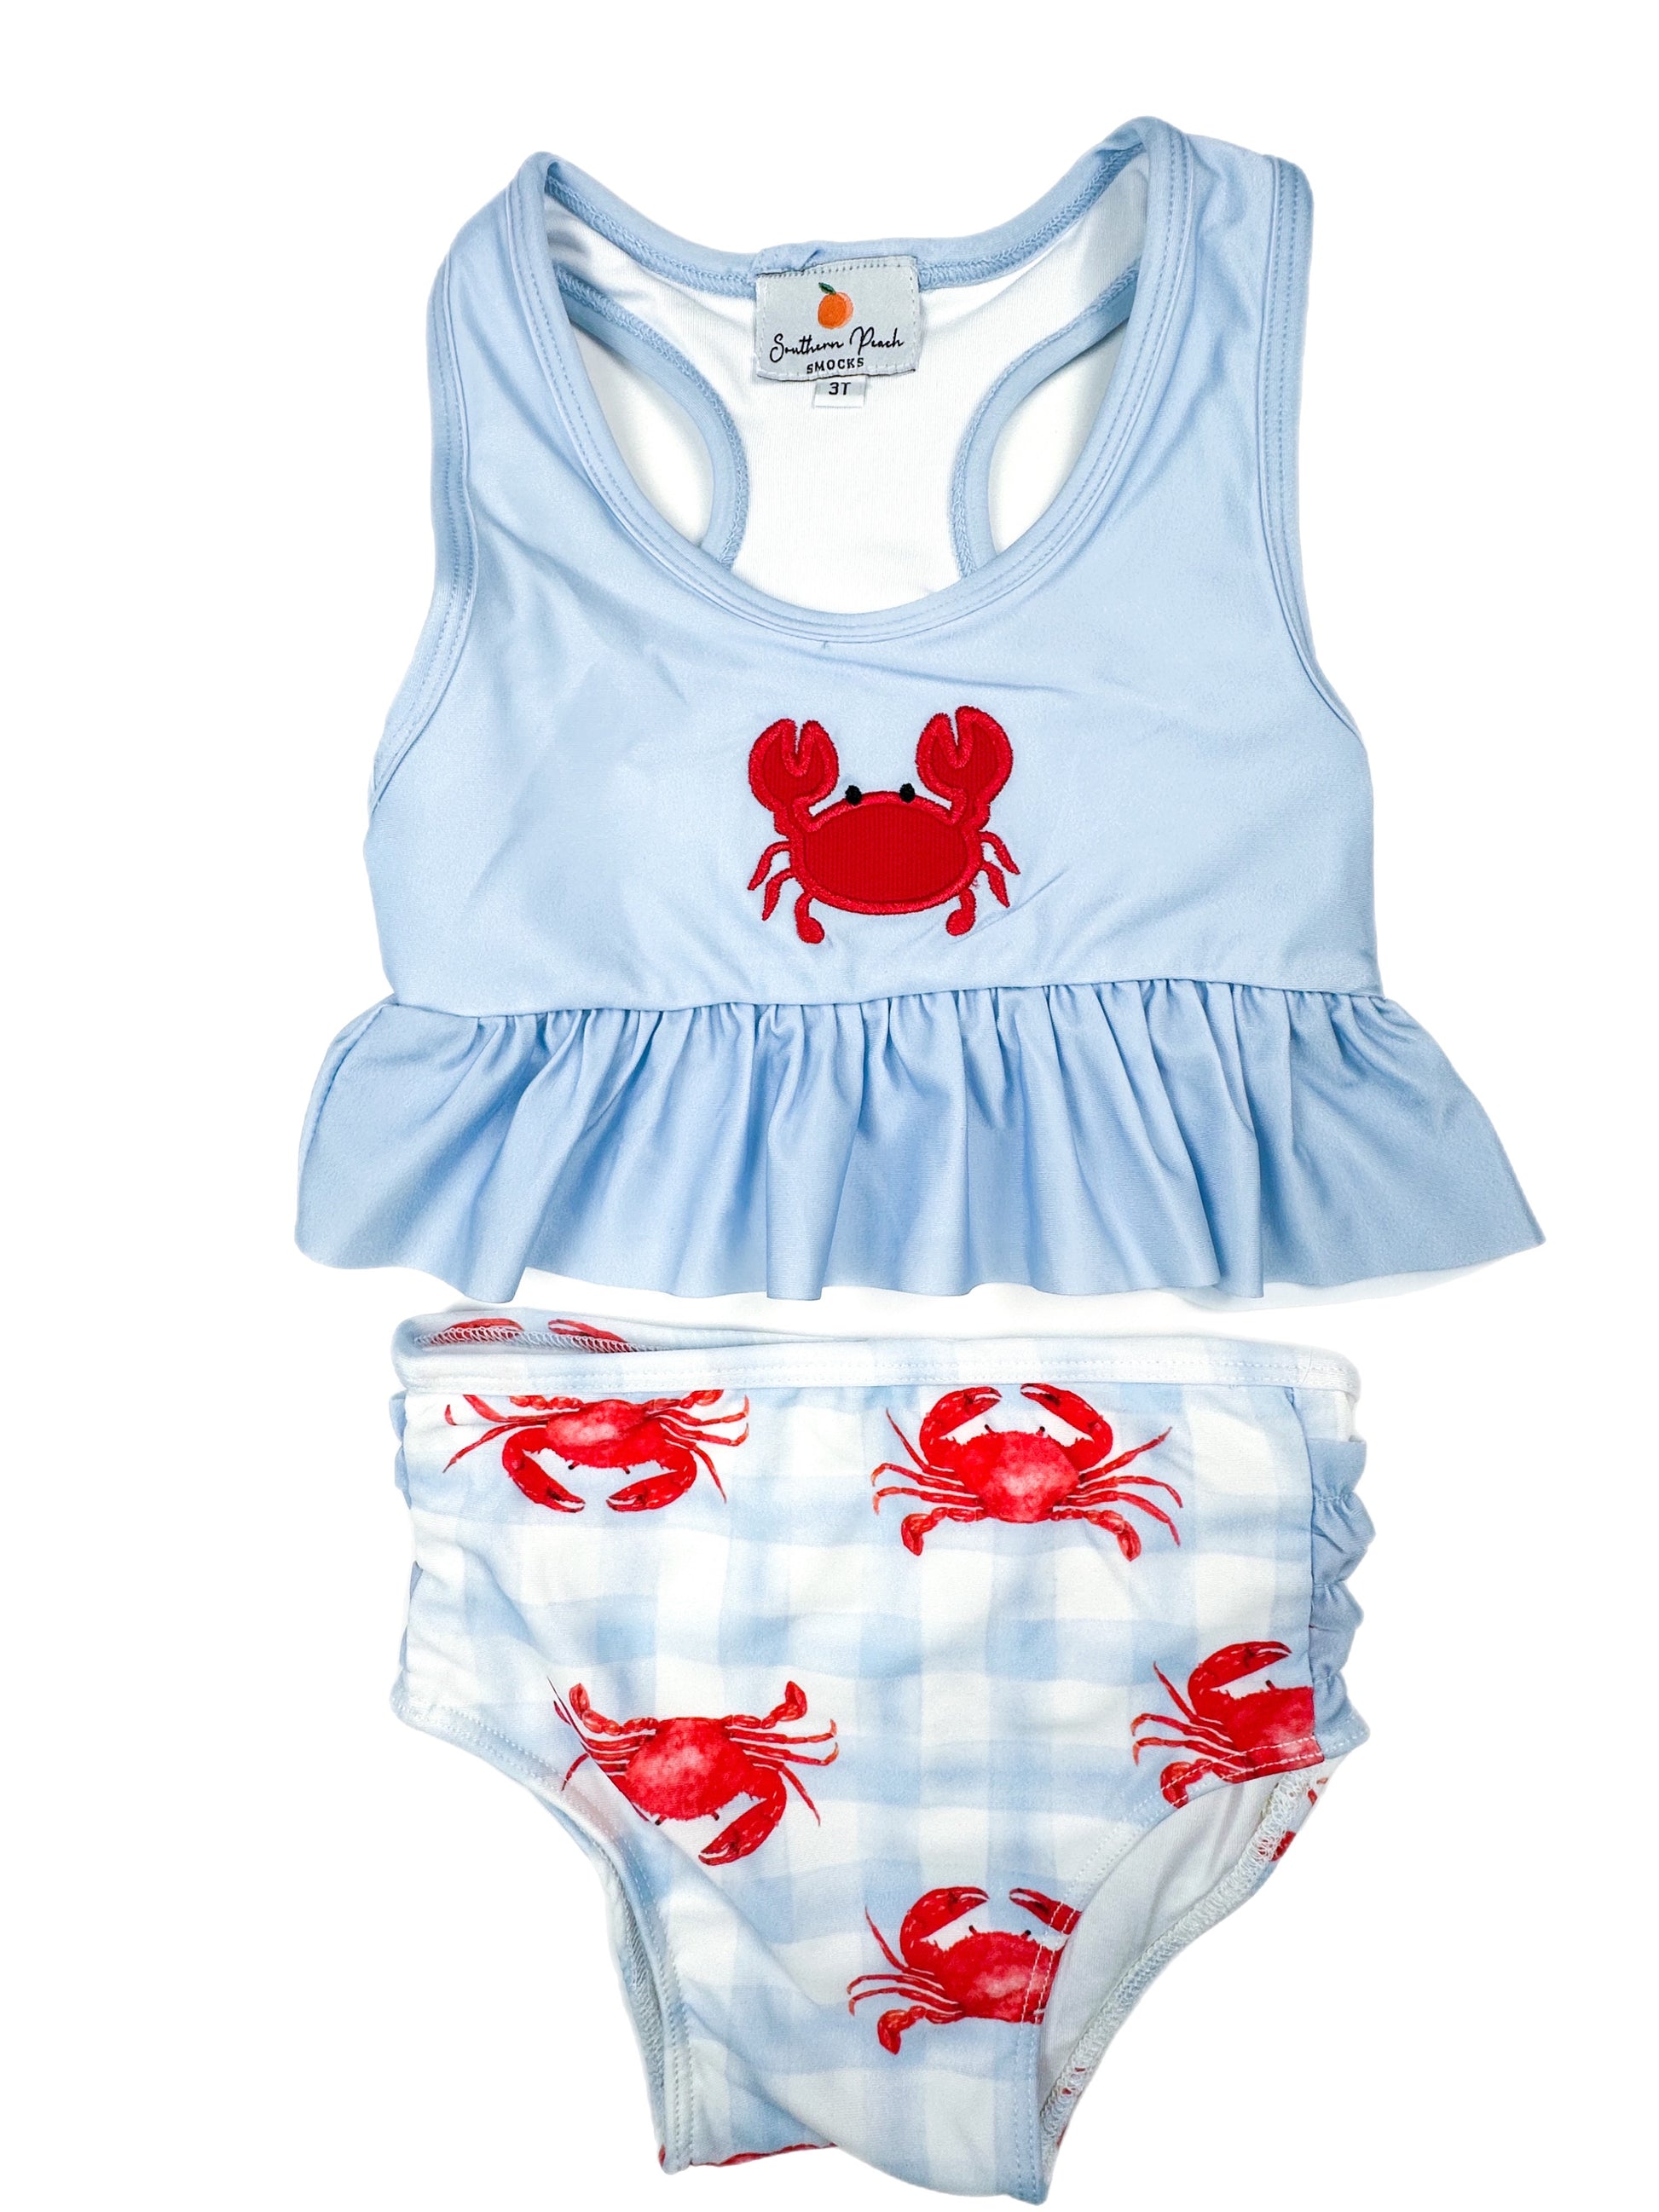 Wholesale Cute Printed Two Piece Swimsuit For Older Girls Durable Kids  Swimwear From Alimama07, $23.45